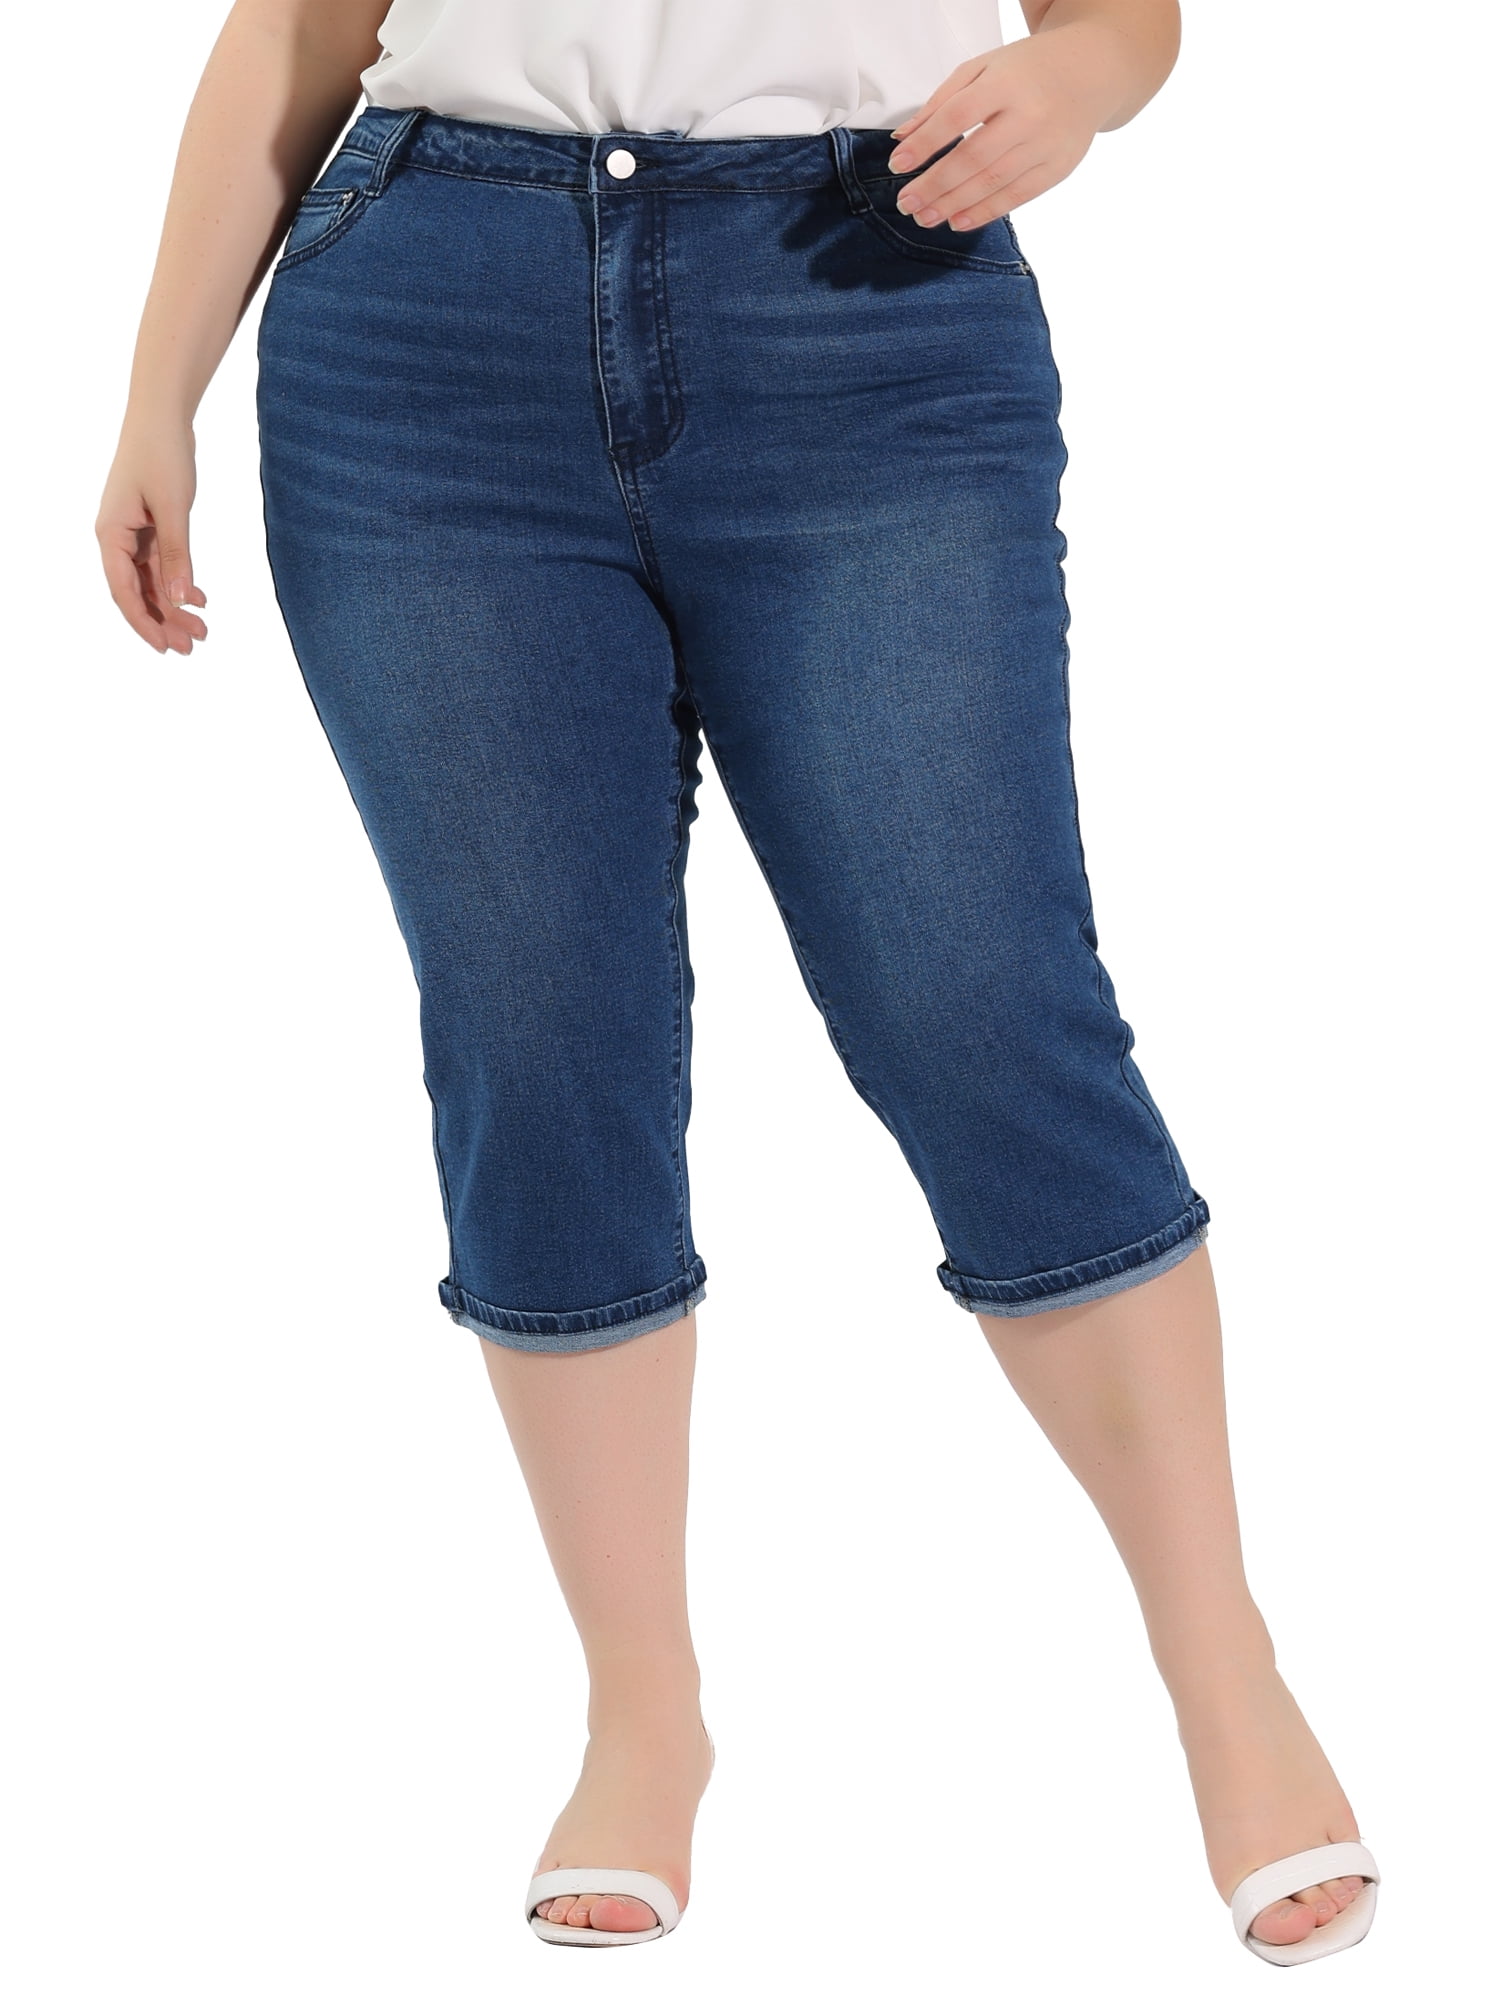 Care Label Denim Trousers in Blue Womens Clothing Jeans Capri and cropped jeans 